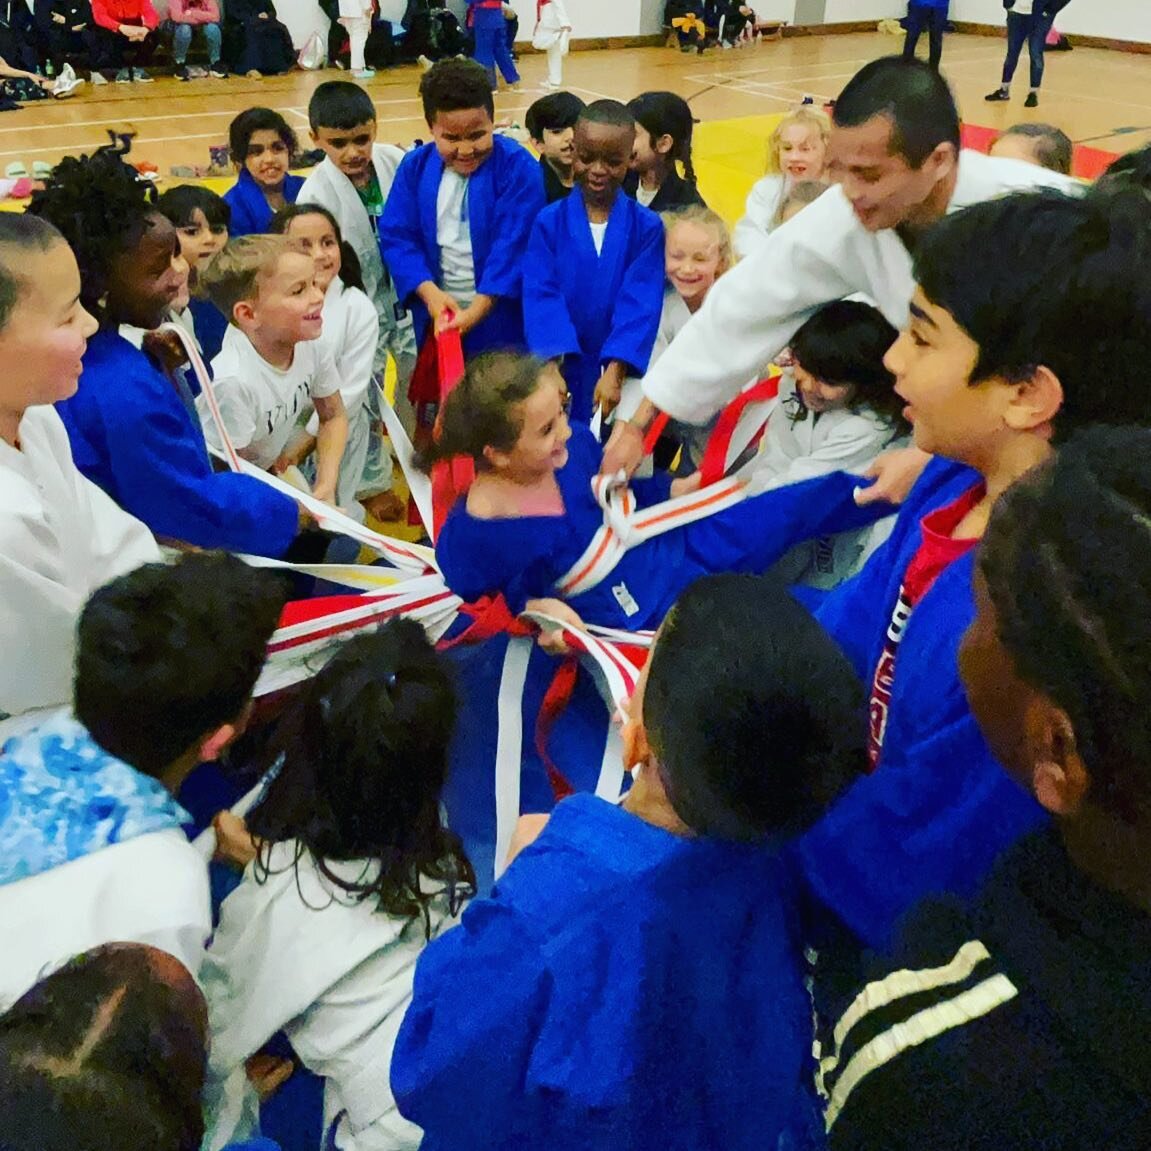 Birthday bumps for the birthday girl! Big happy birthday to Amreen 🥳❤️ 

It&rsquo;s so lovely to be back today after half term with so many happy faces 😆

#proudcoach #judo #judokids #birthdaybumps #birthday #judofamily @judogallerykids